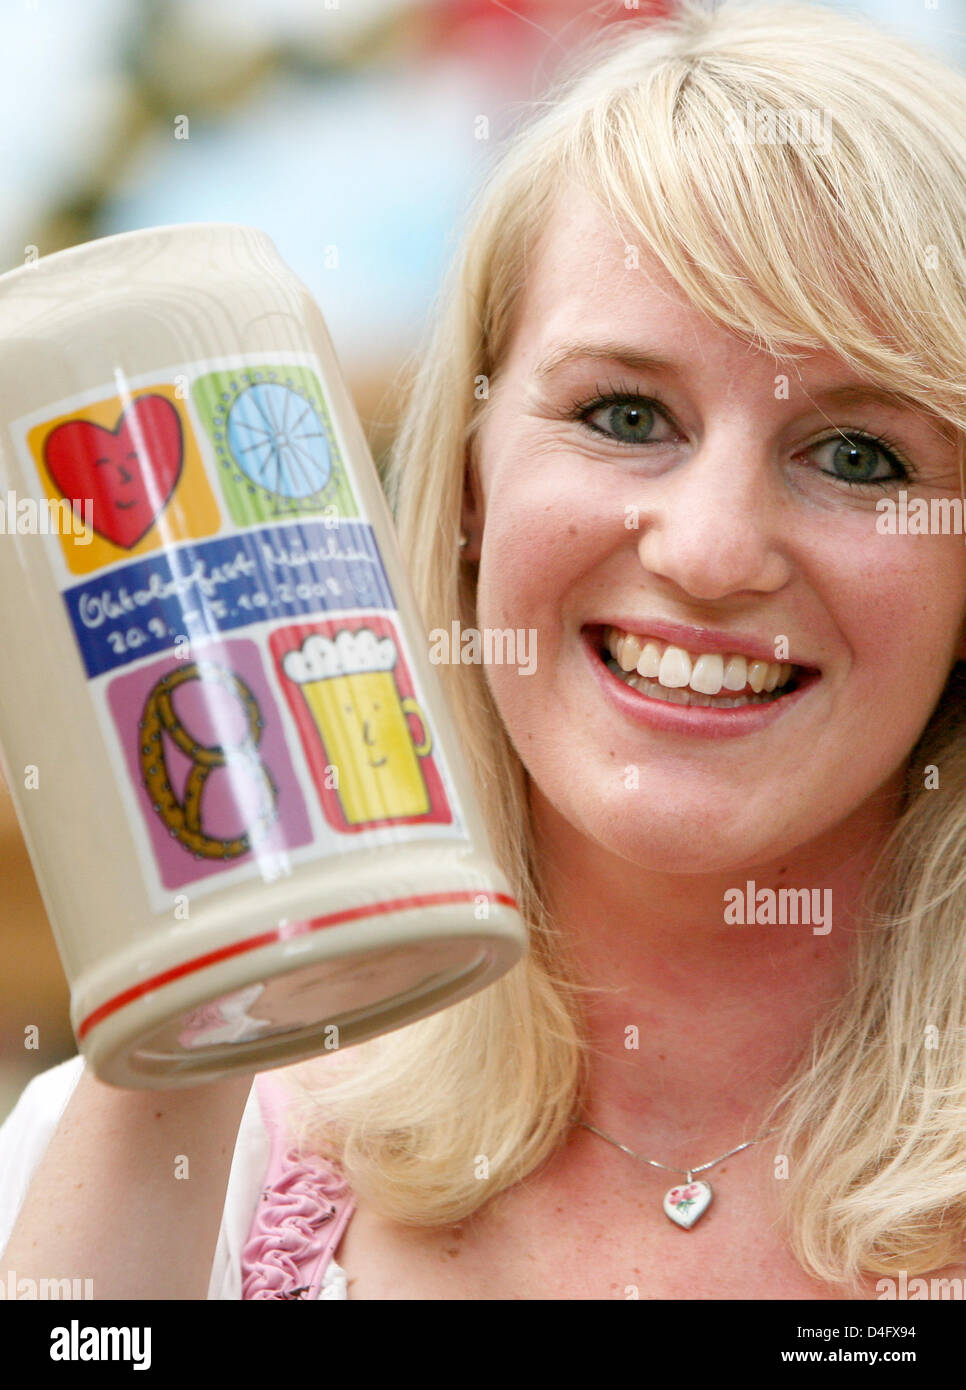 Assistant of the tourist office, Susanne Schneider, presents the official 'Wiesn-beer jug 2008' in Munich, Germany, 28 August 2008. The 175th Oktoberfest (Munich Beer Festival) will take place from 20 September till 5 Oktober 2008 in Munich. Photo: Tobias Hase Stock Photo